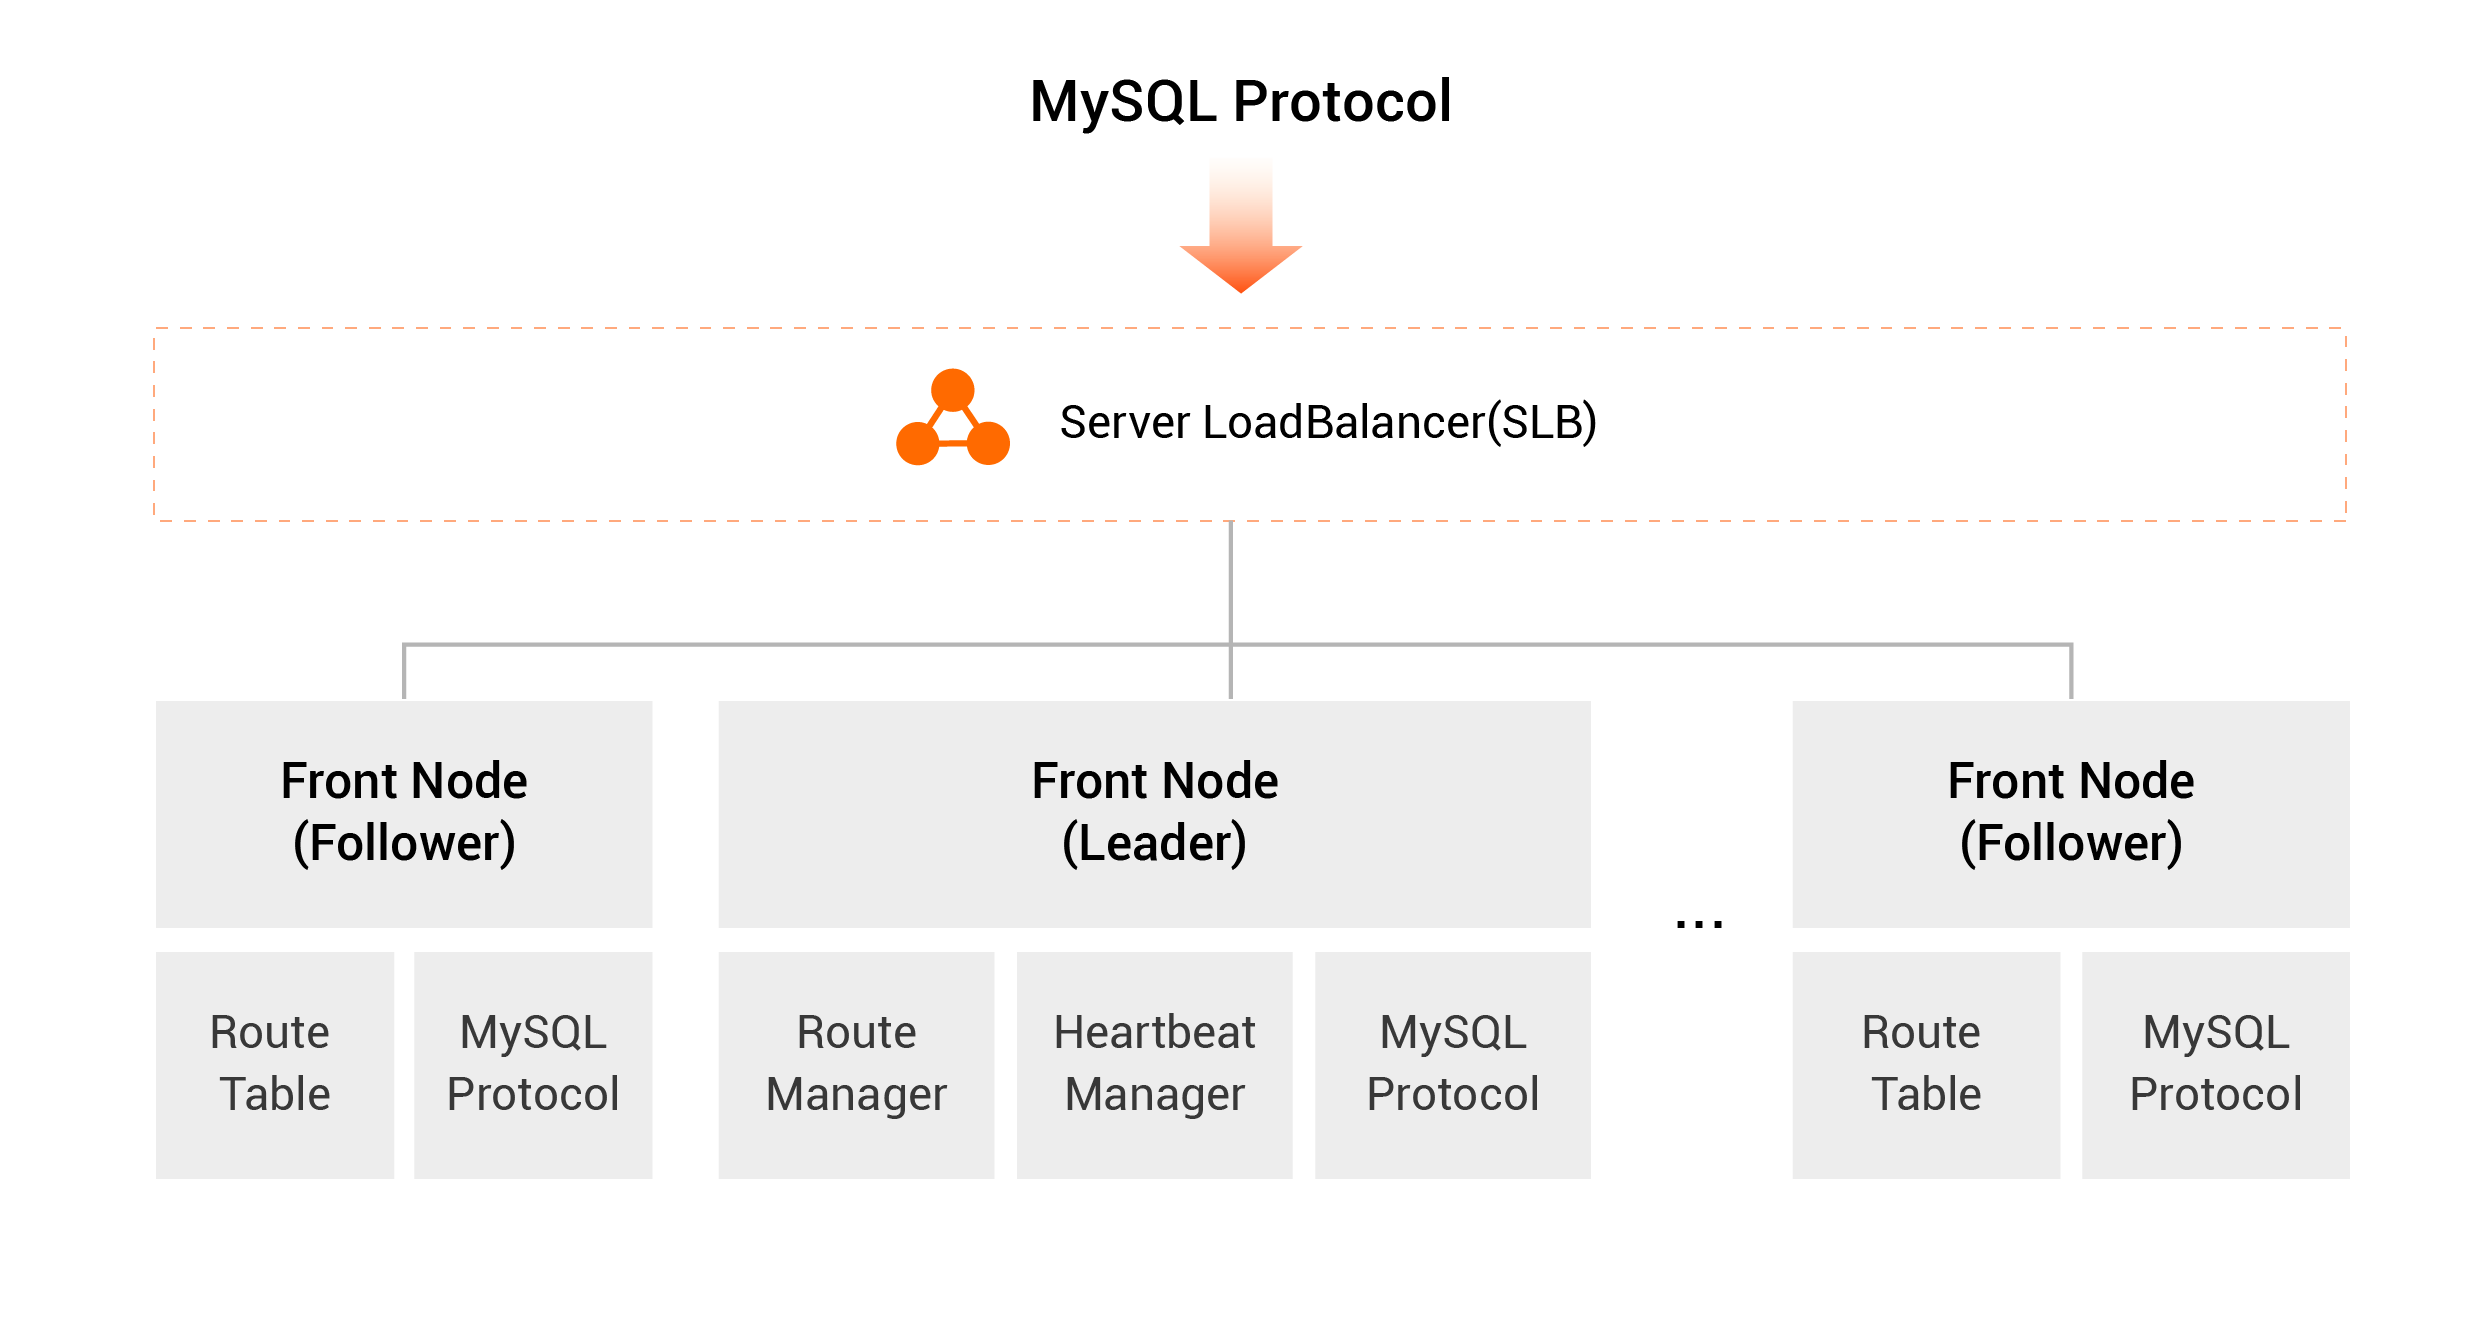 High availability of the access layer